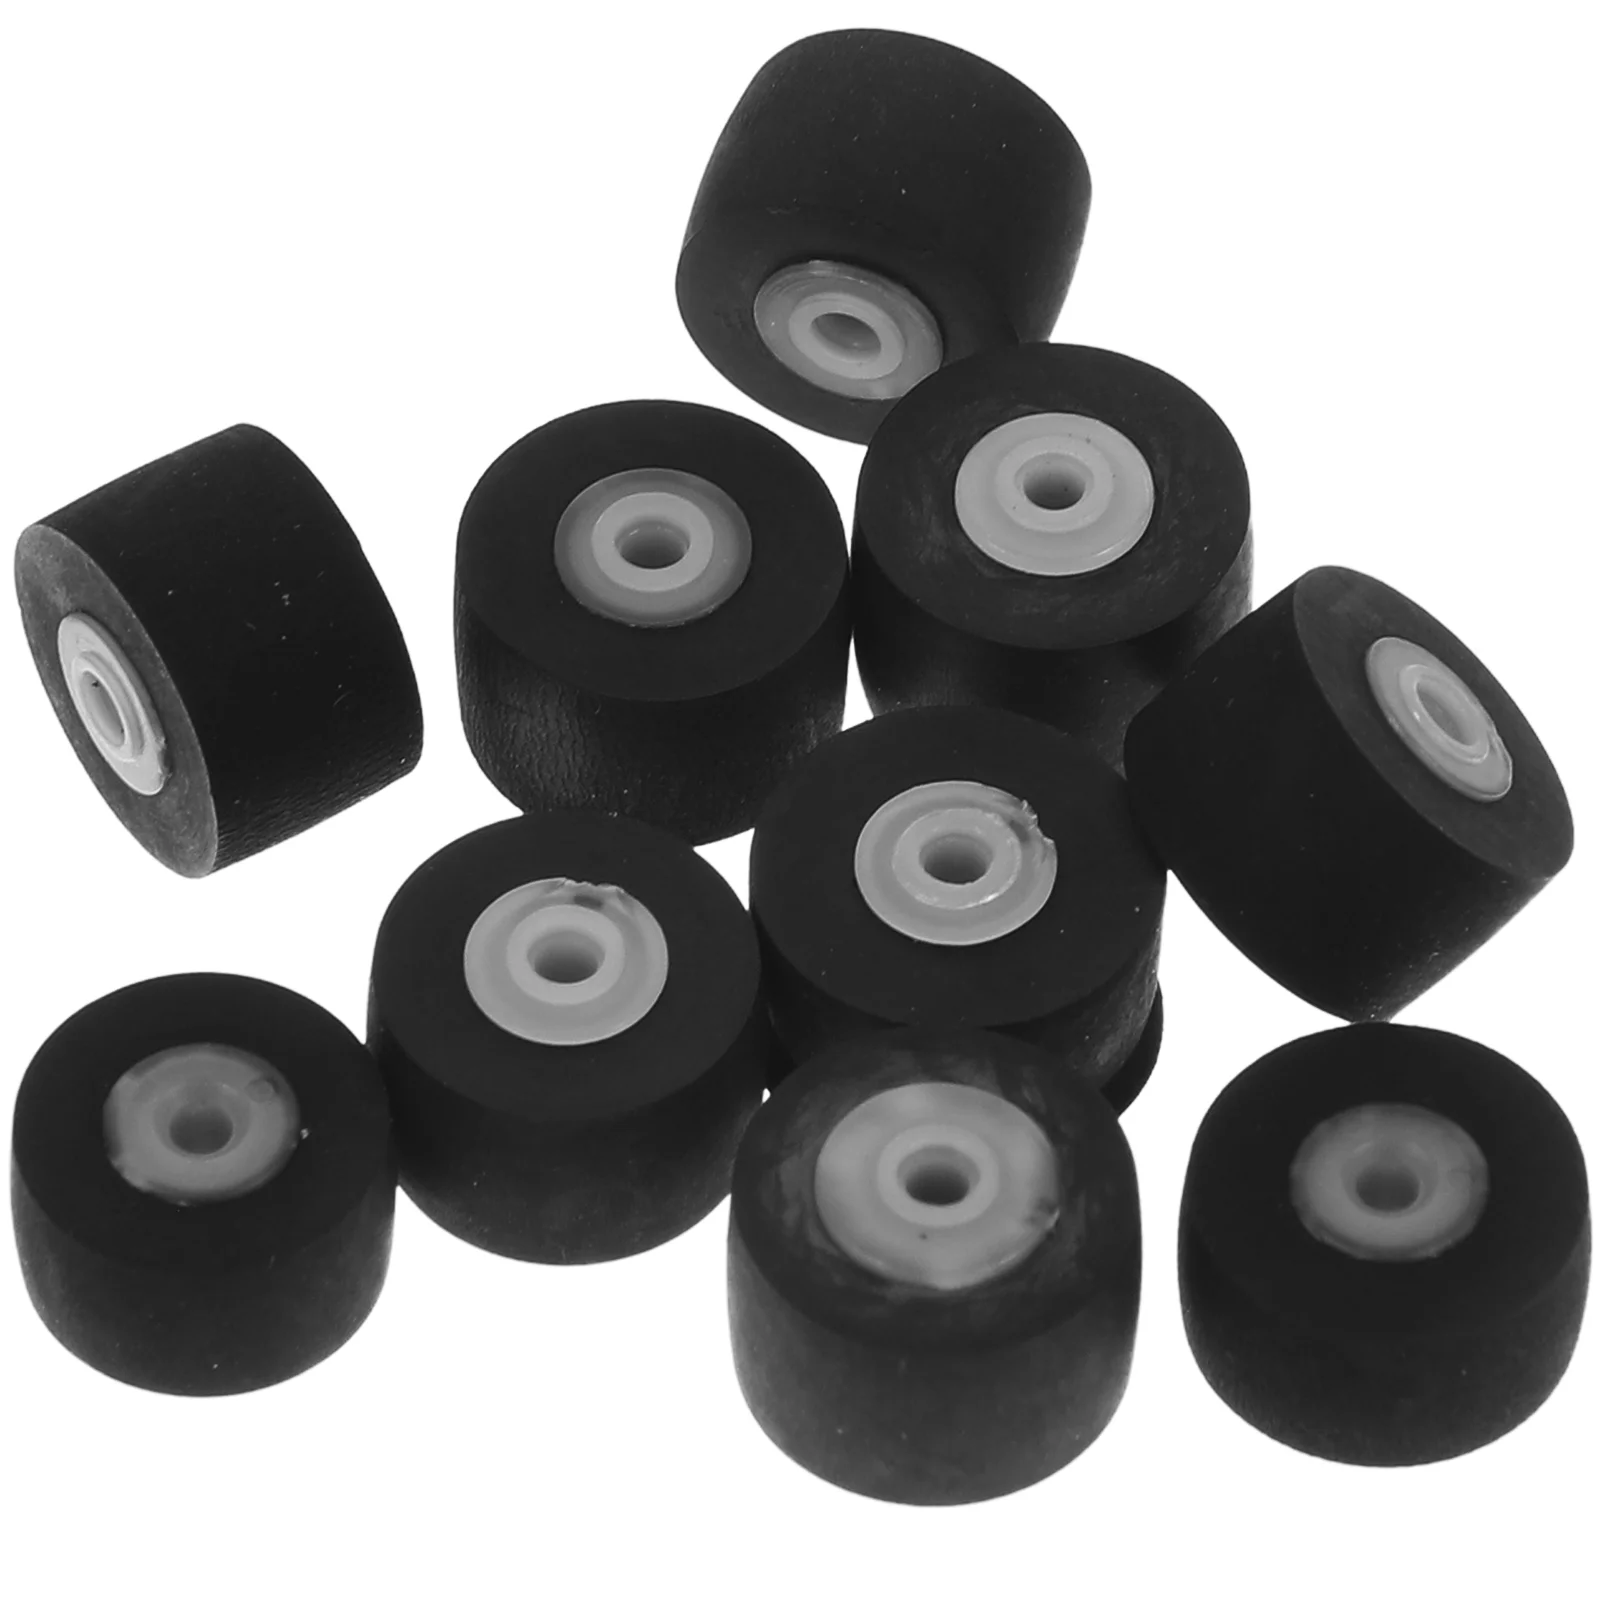 

10 Pcs Voice Recorders Bearing Wheel Pinch Roller for Radio Tape Supplies Suite Deck Video Pulley Stereo Player